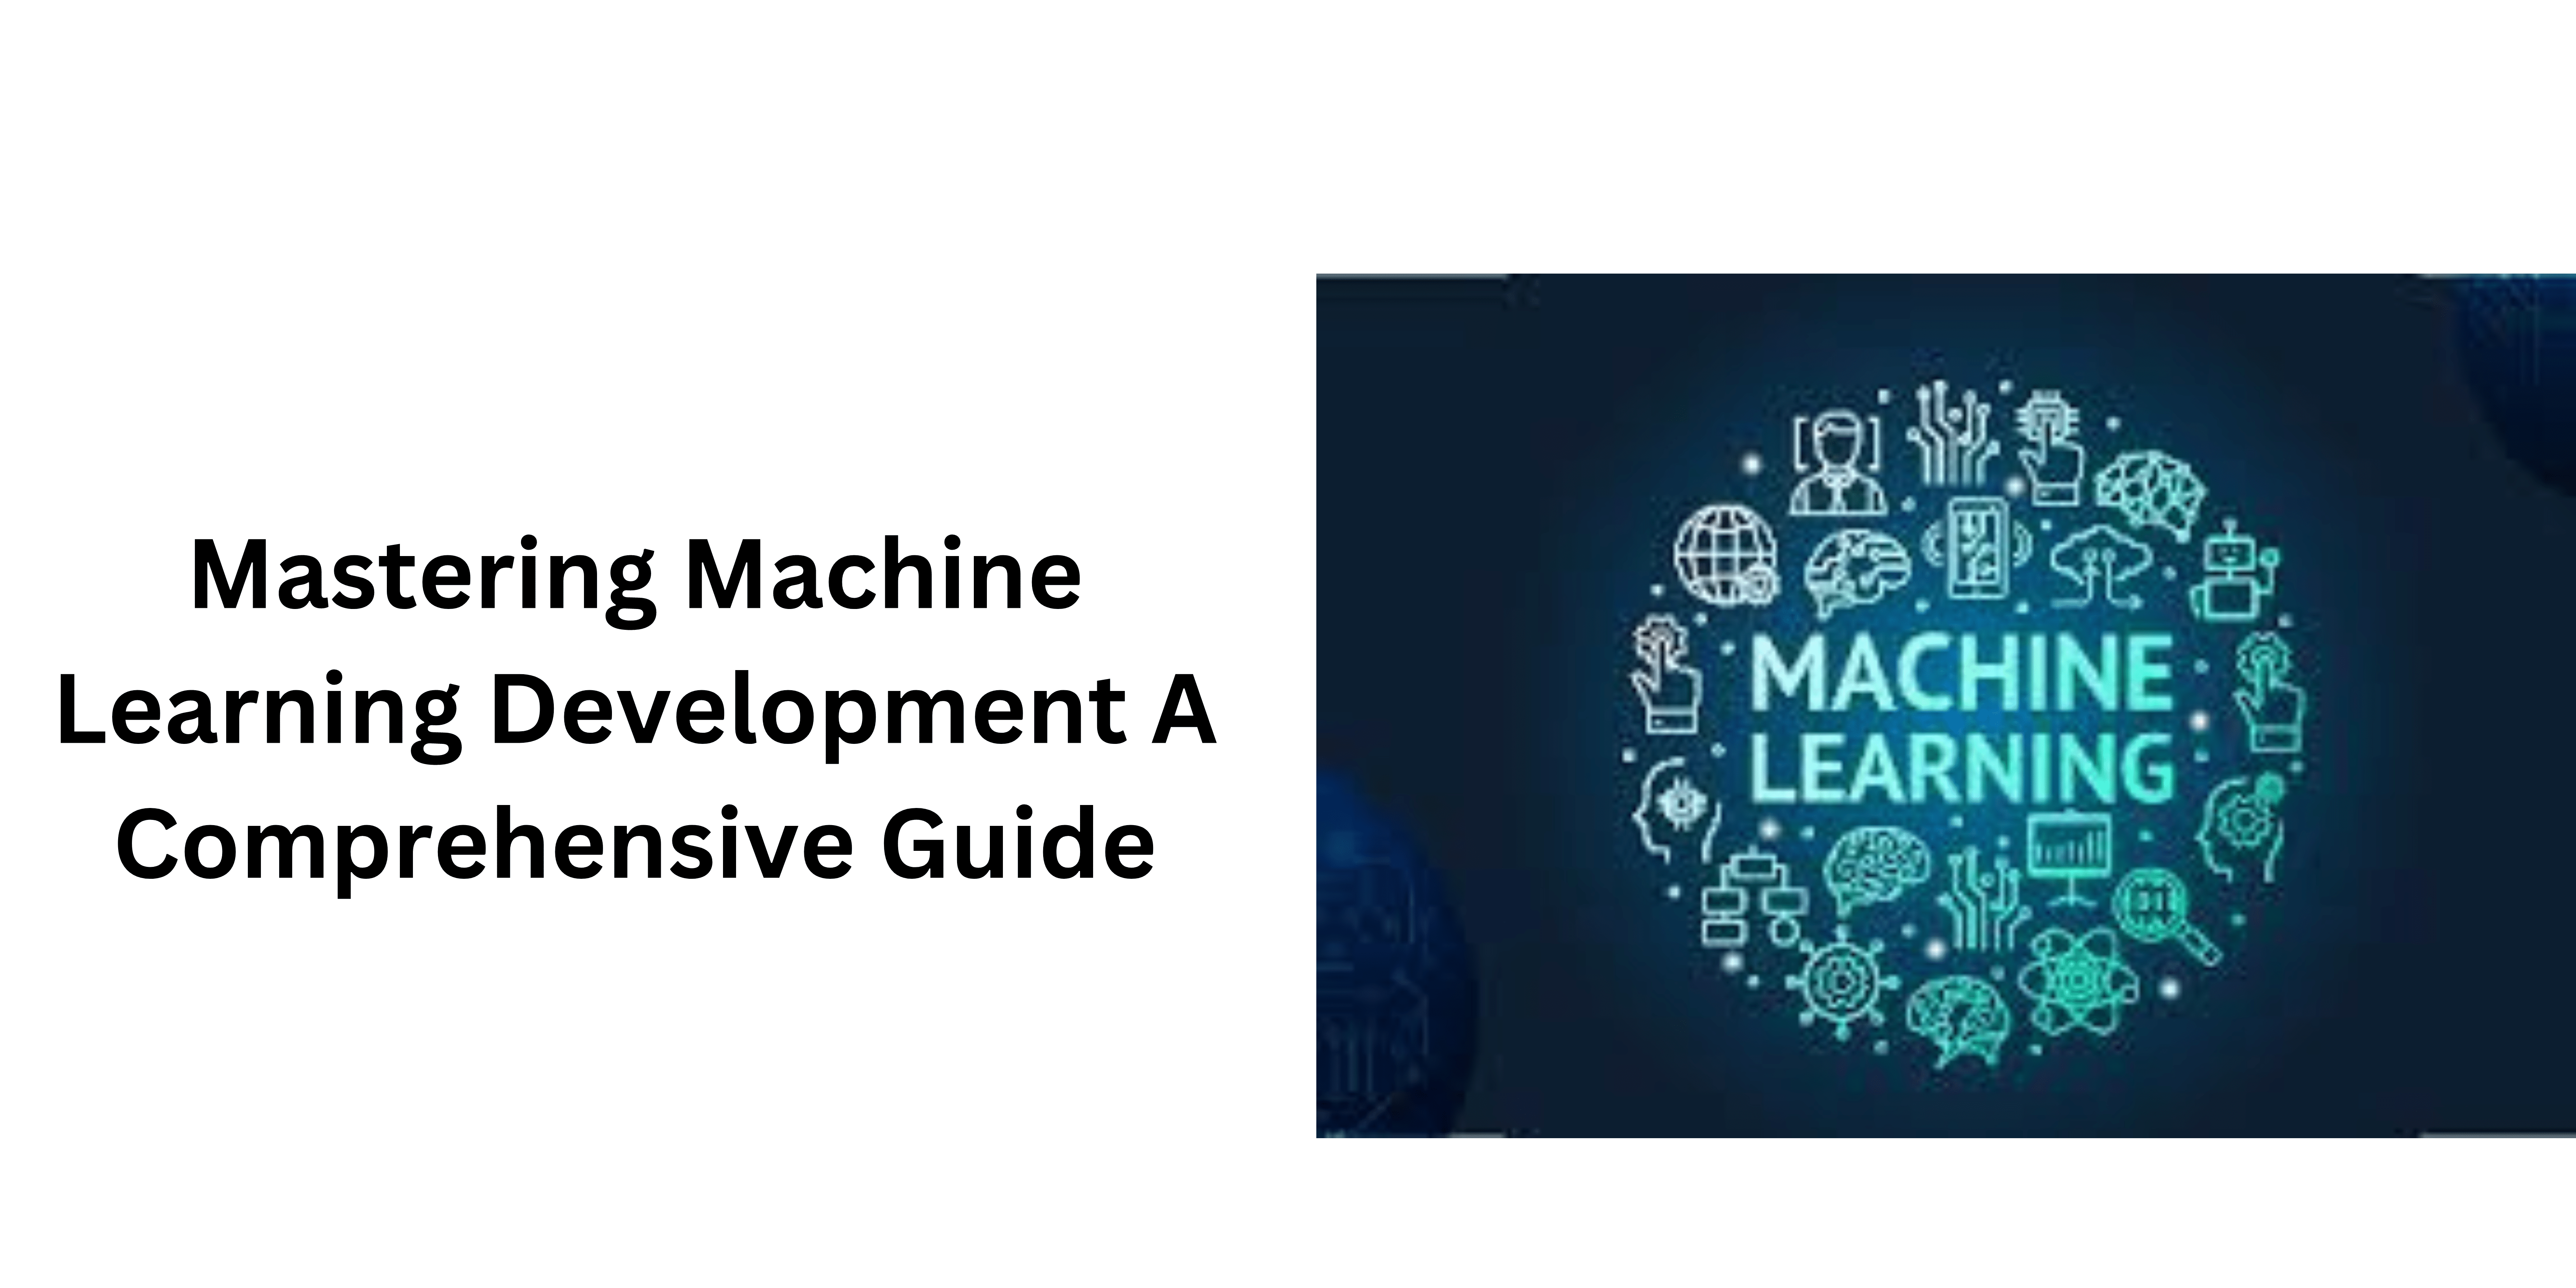 Mastering Machine Learning Development A Comprehensive Guide